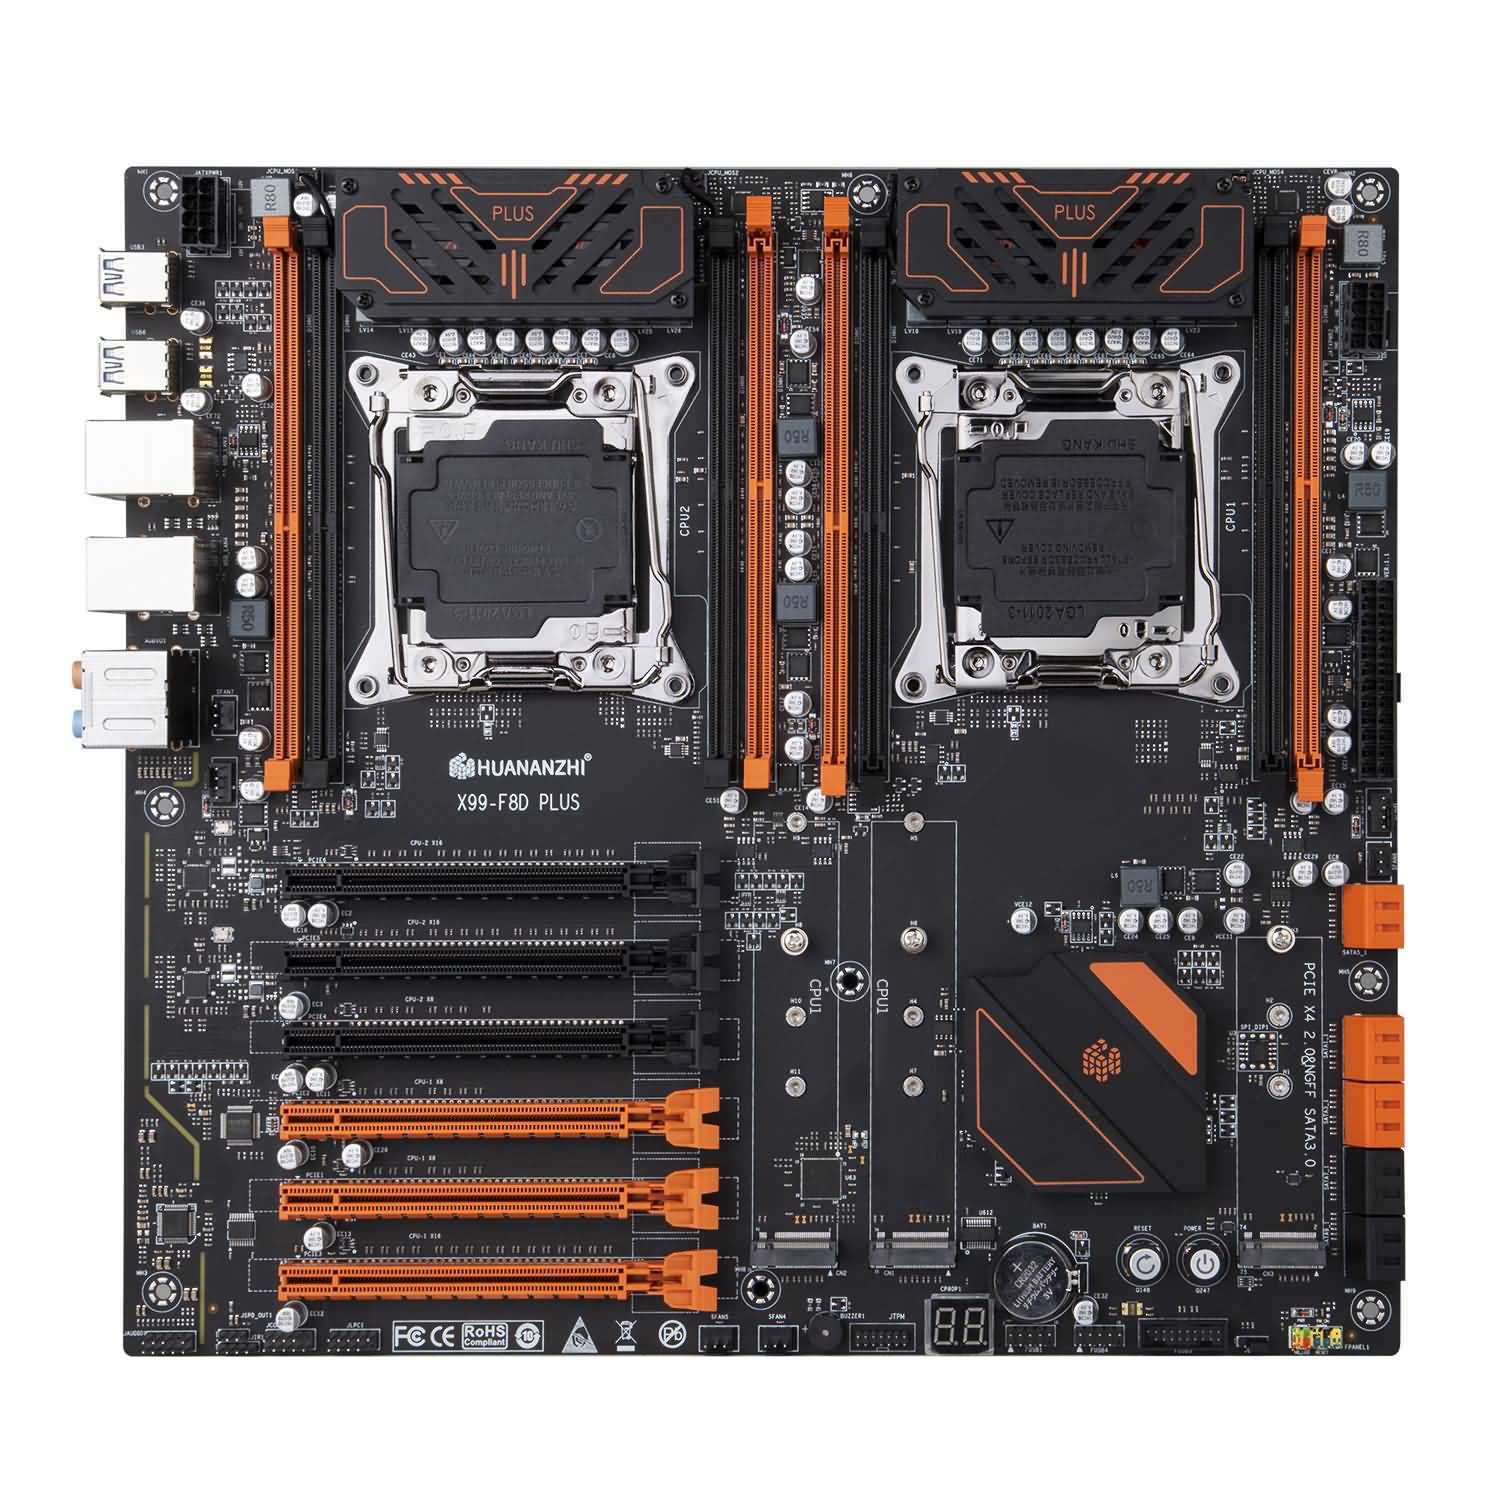 Download Huananzhi X99-F8D PLUS Motherboard Free